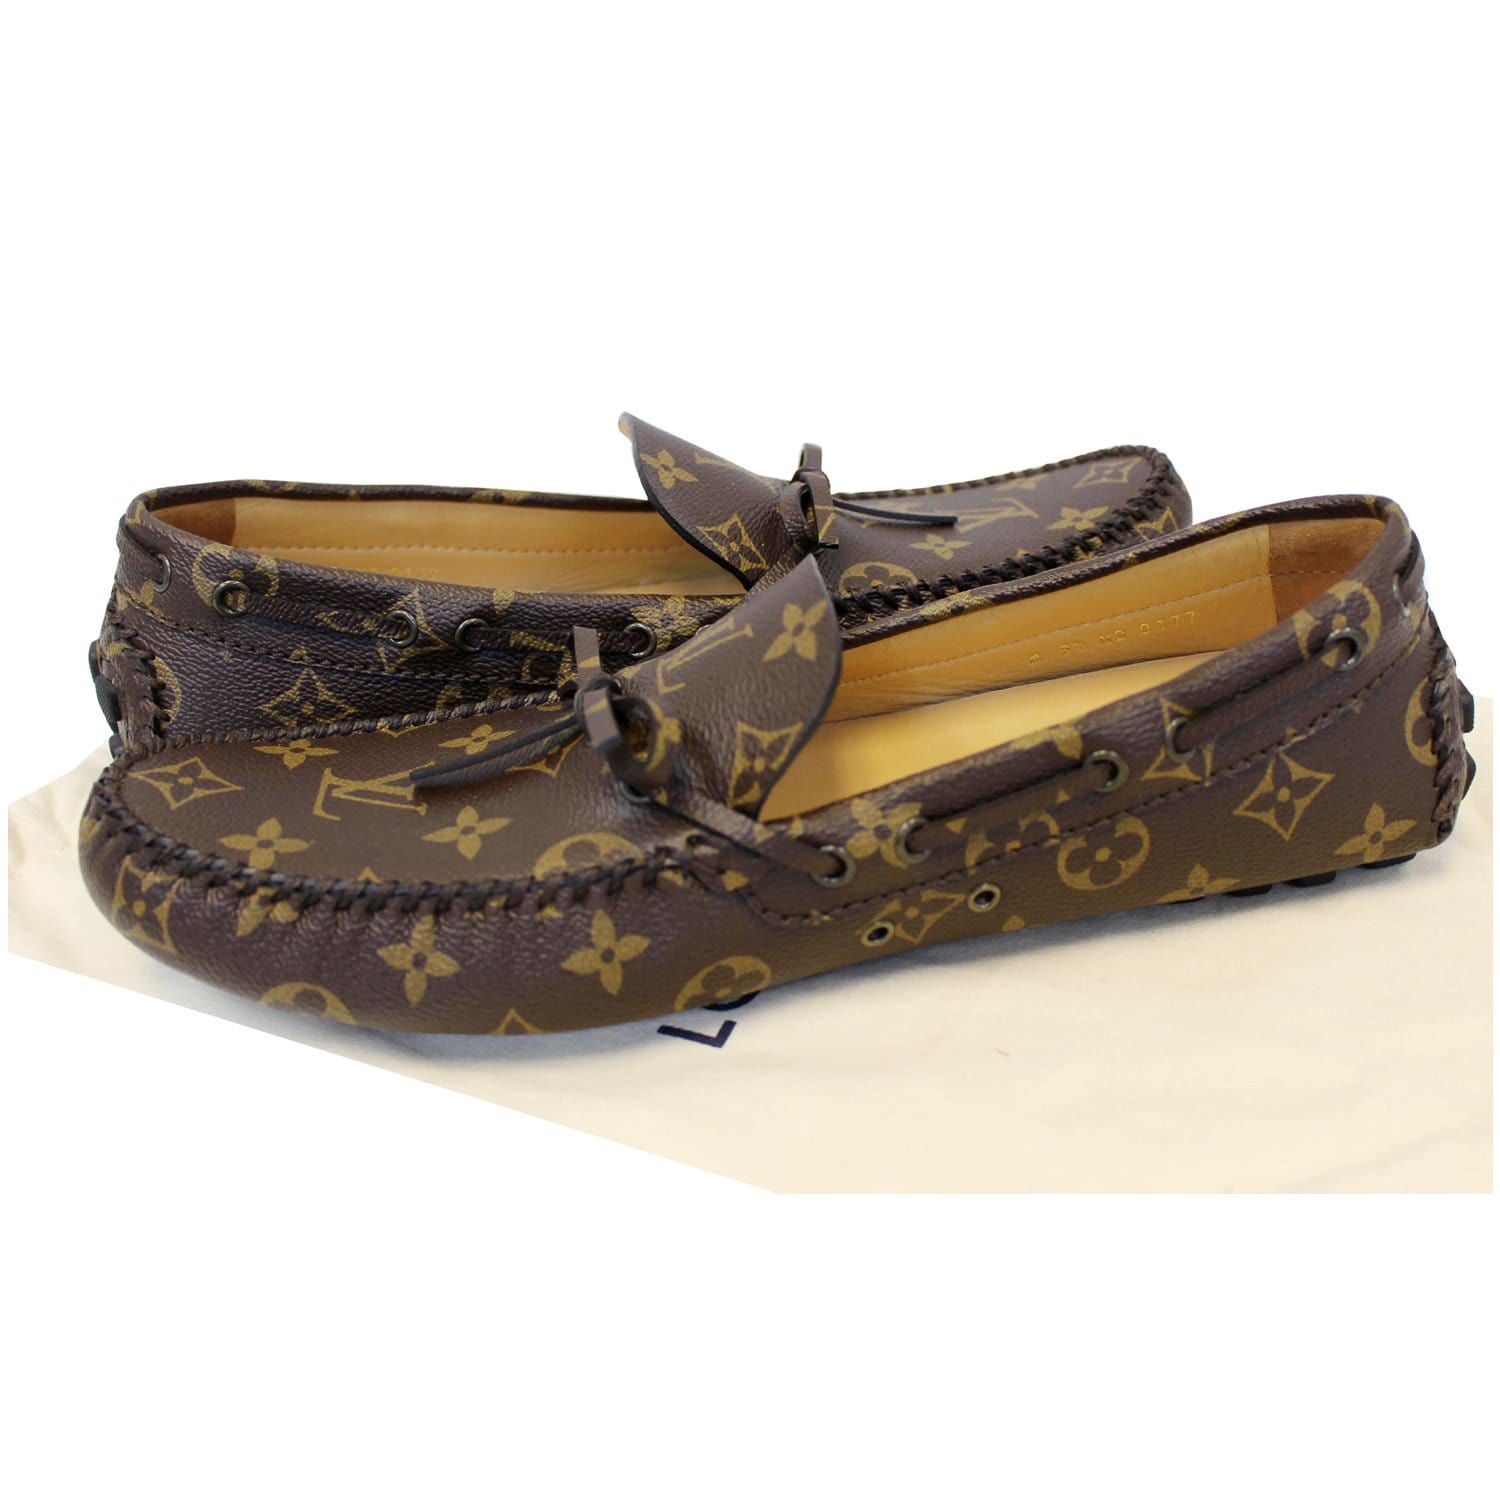 Sold at Auction: LOUIS VUITTON - LV ARIZONA MOCCASIN LOAFERS - WOMENS 9